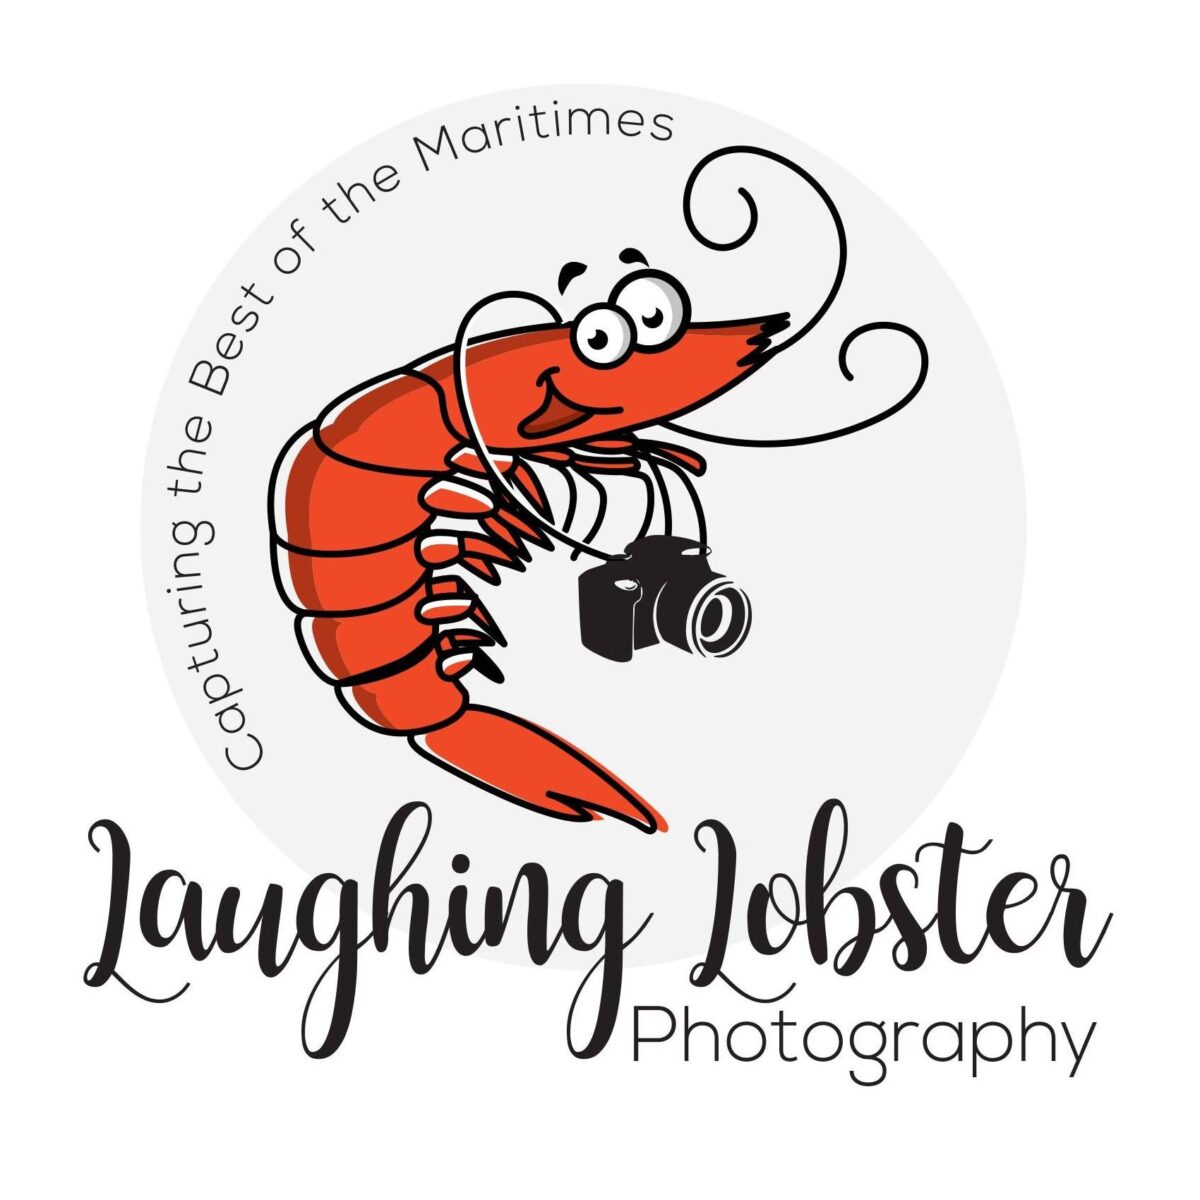 Laughing Lobster Photography